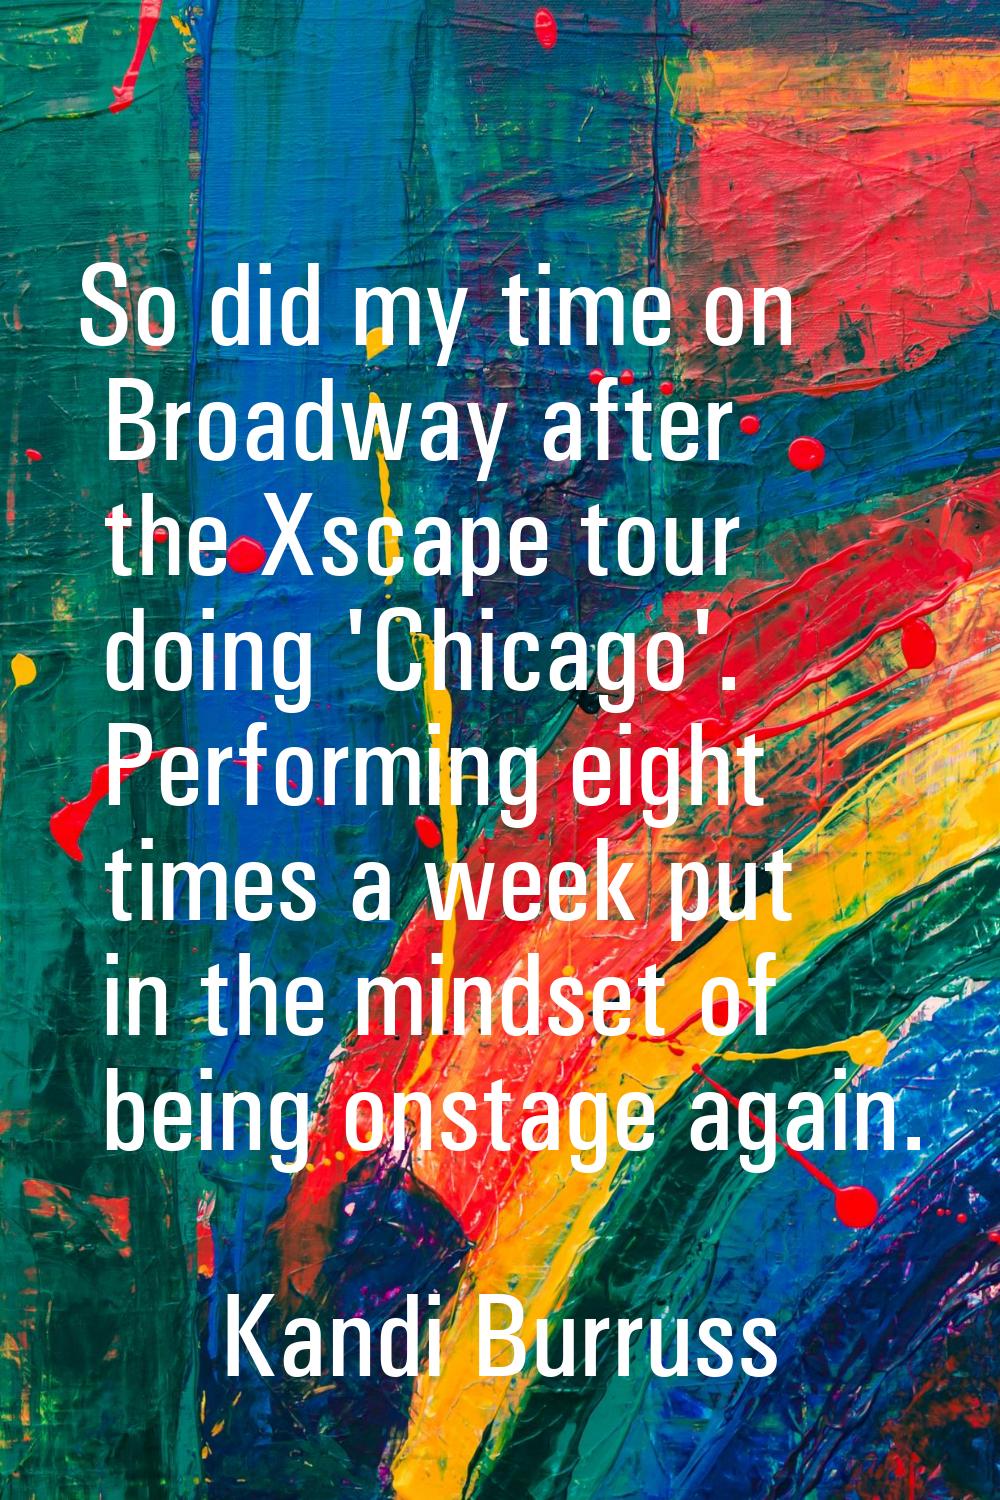 So did my time on Broadway after the Xscape tour doing 'Chicago'. Performing eight times a week put